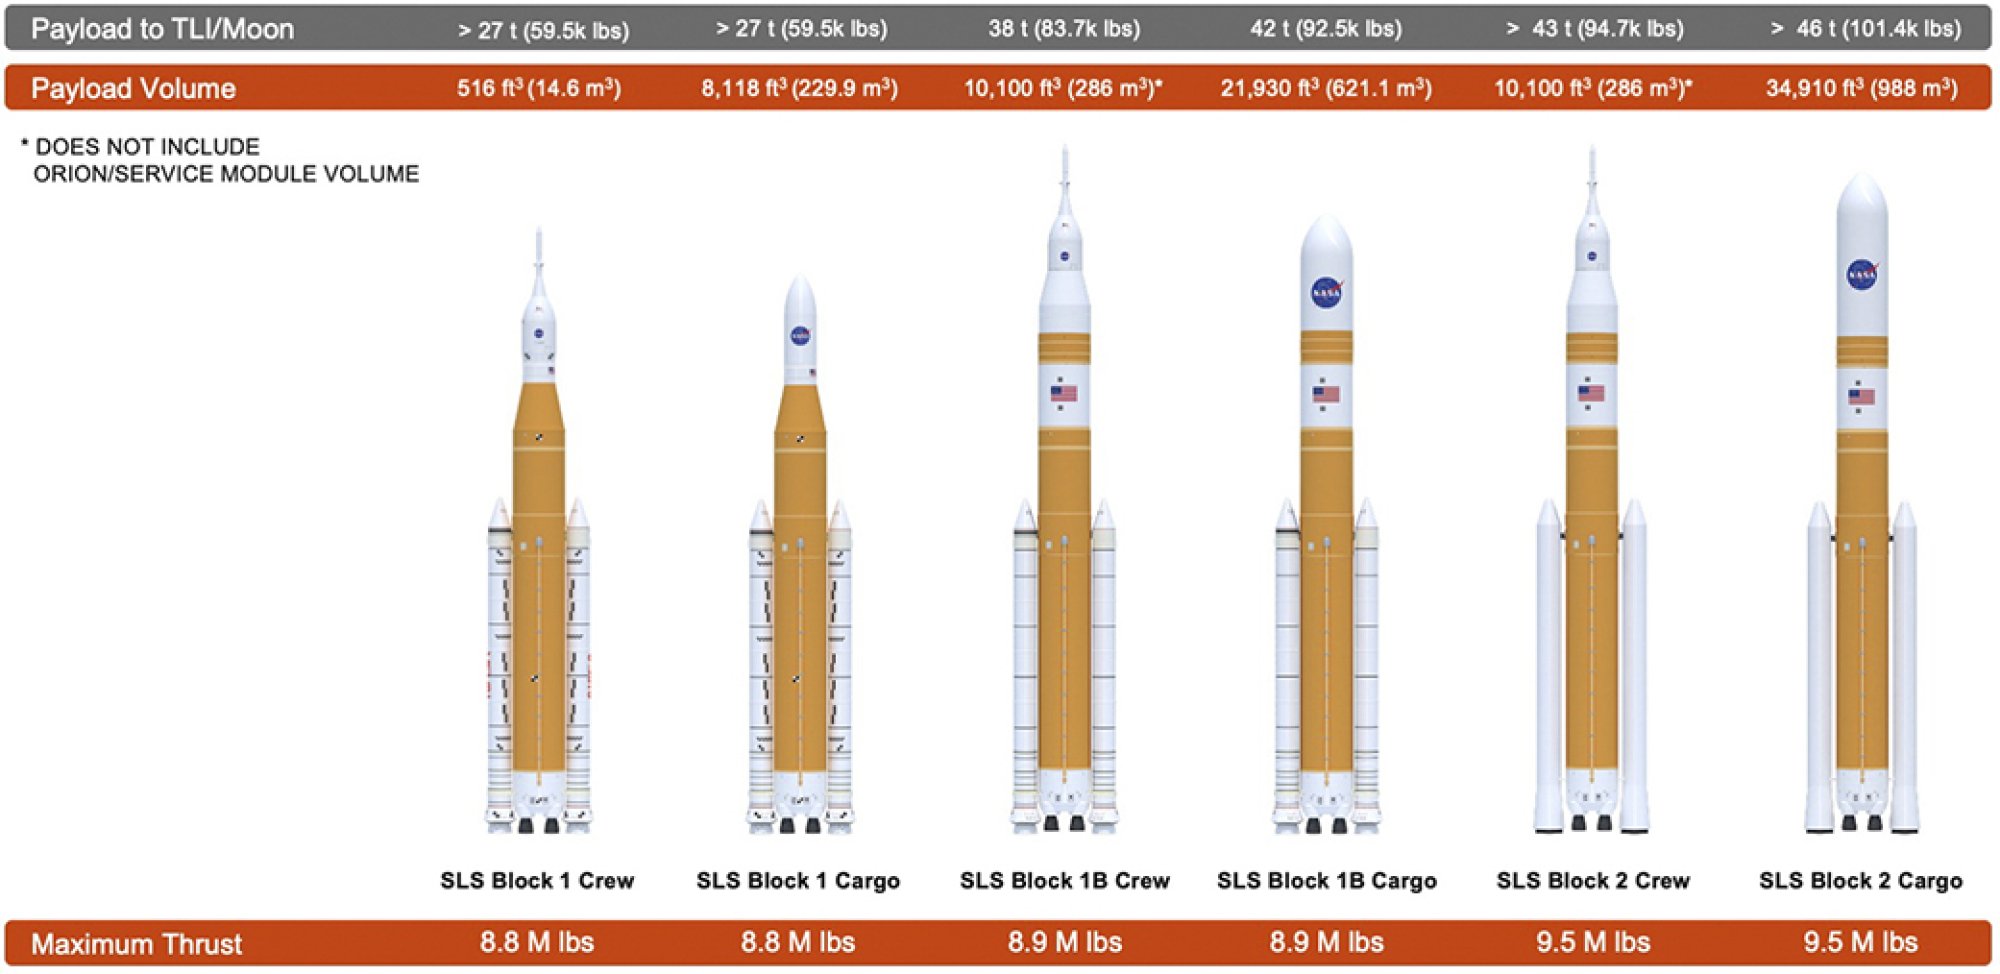 NASA's rocket transforming for different missions